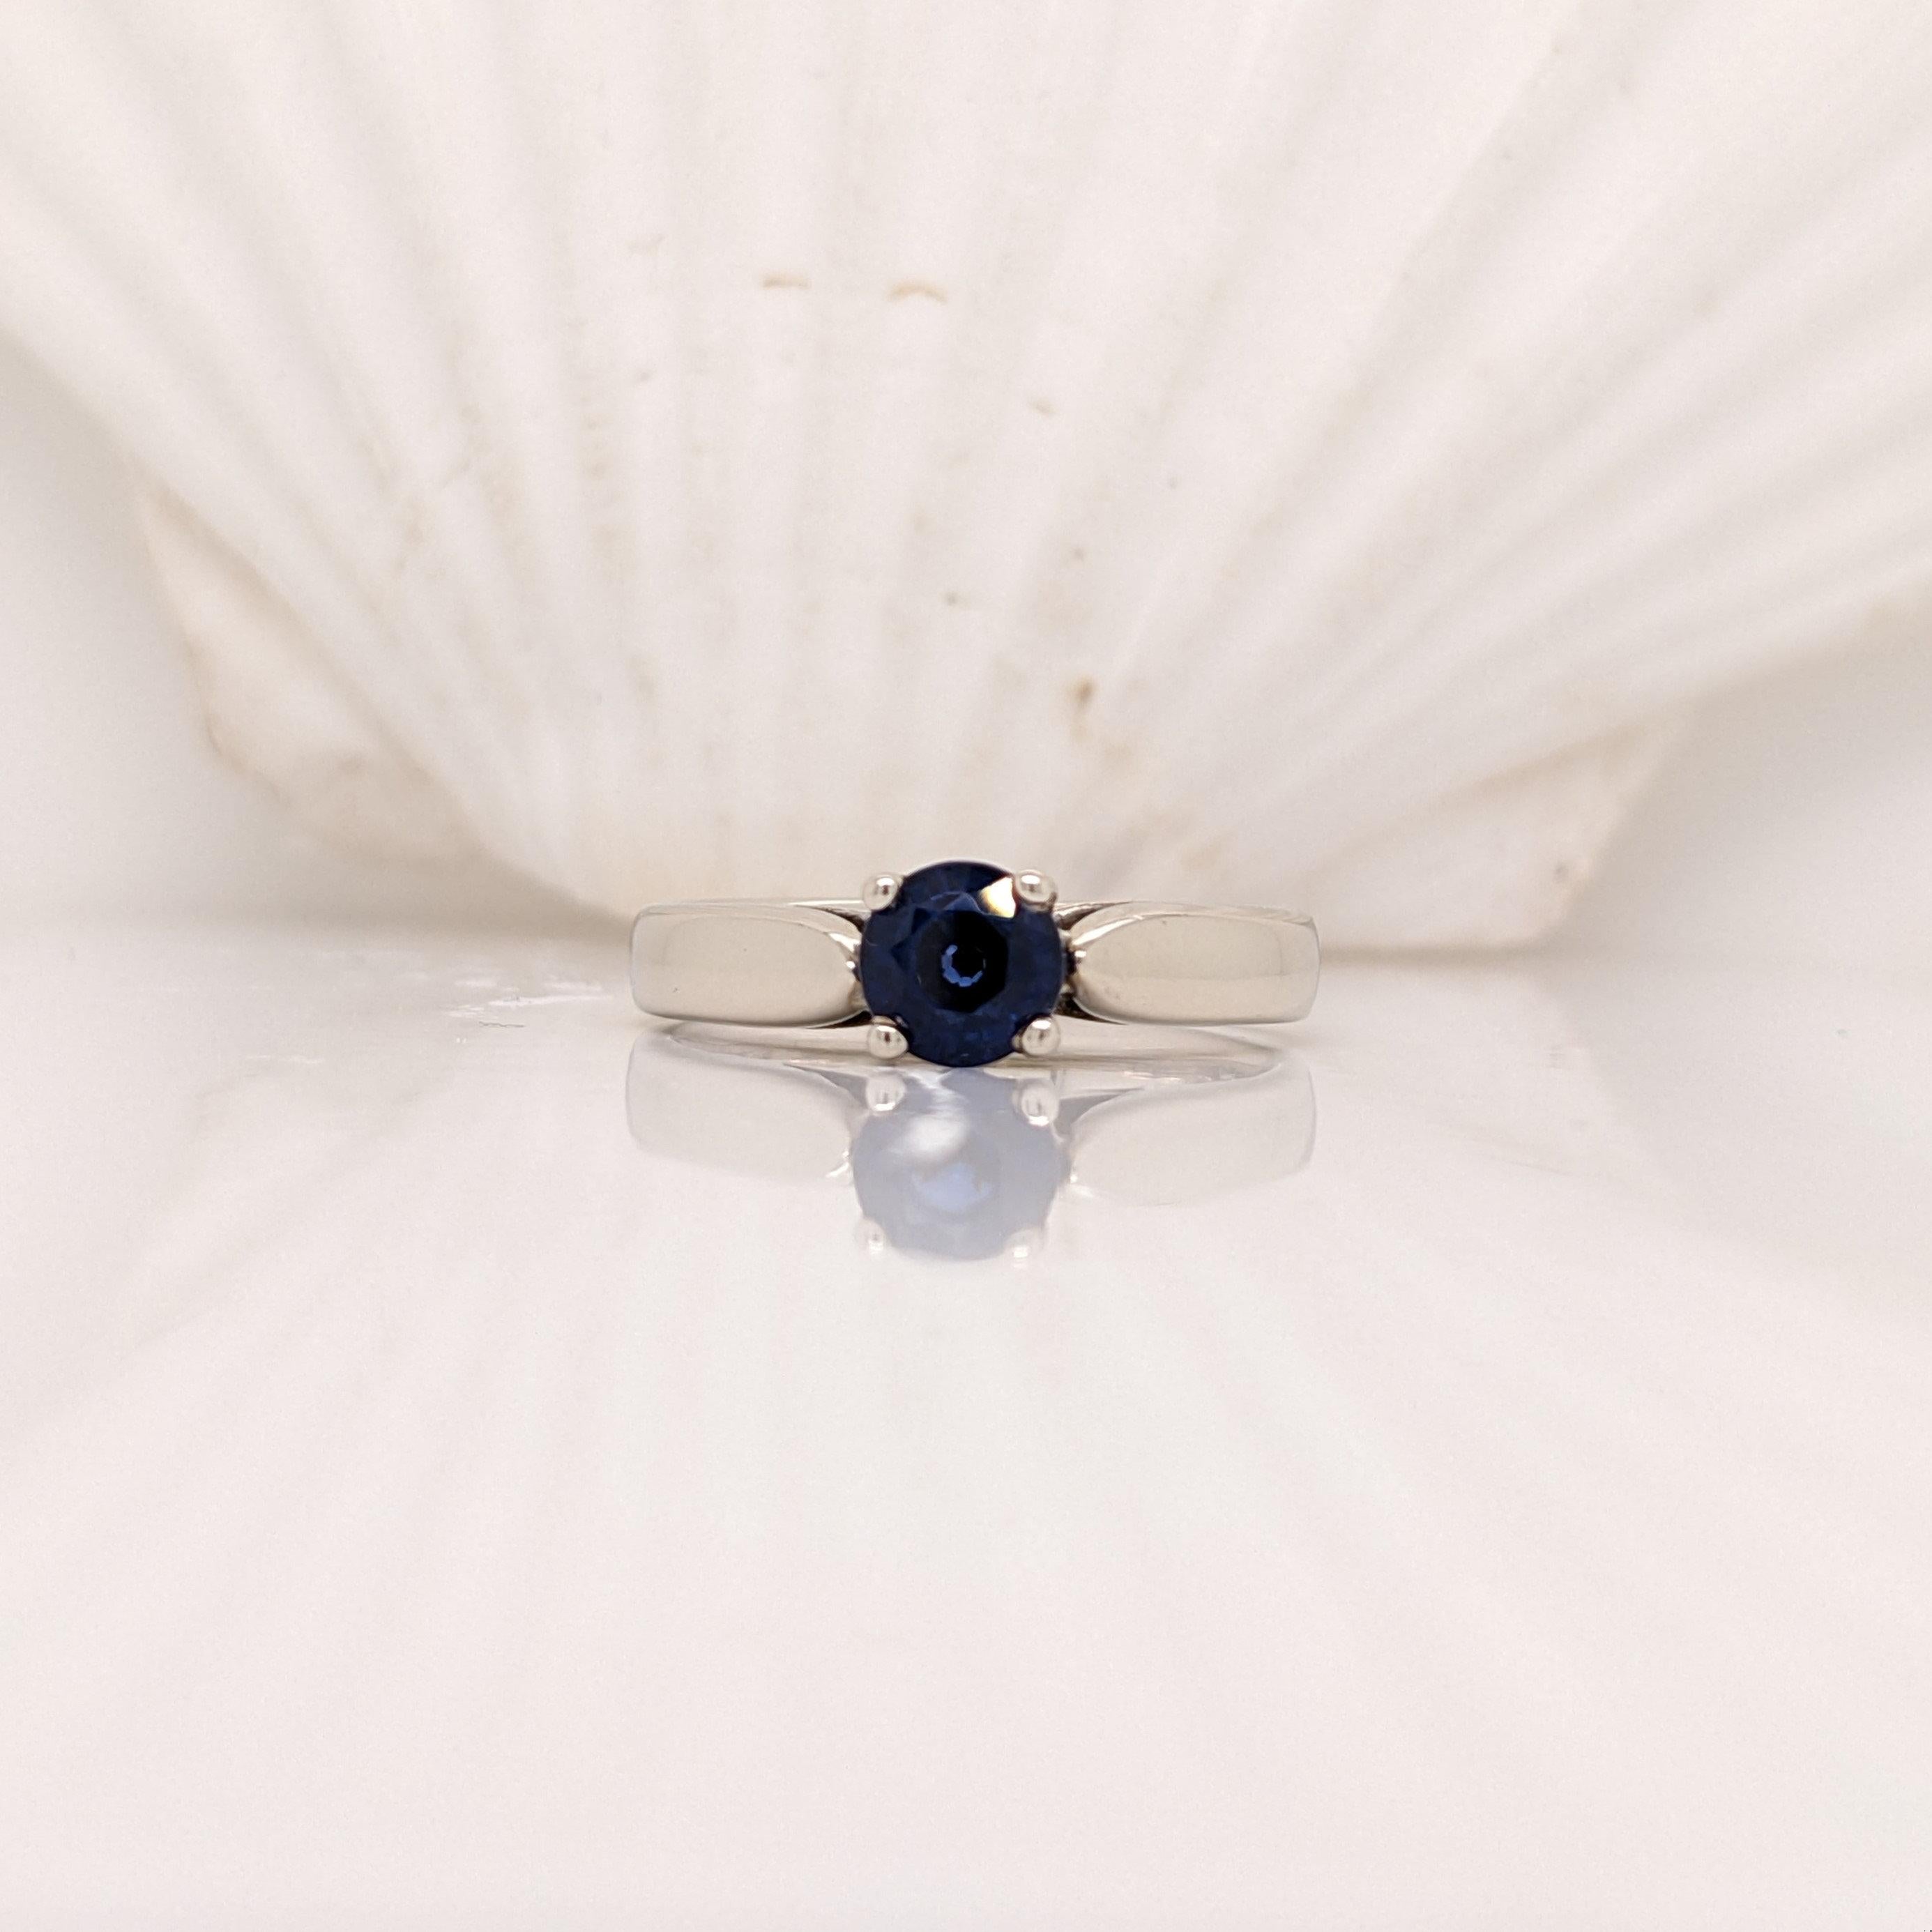 1.2ct Deep Blue Sapphire Ring in Solid 14K White Gold Round 6mm | Solitaire Ring